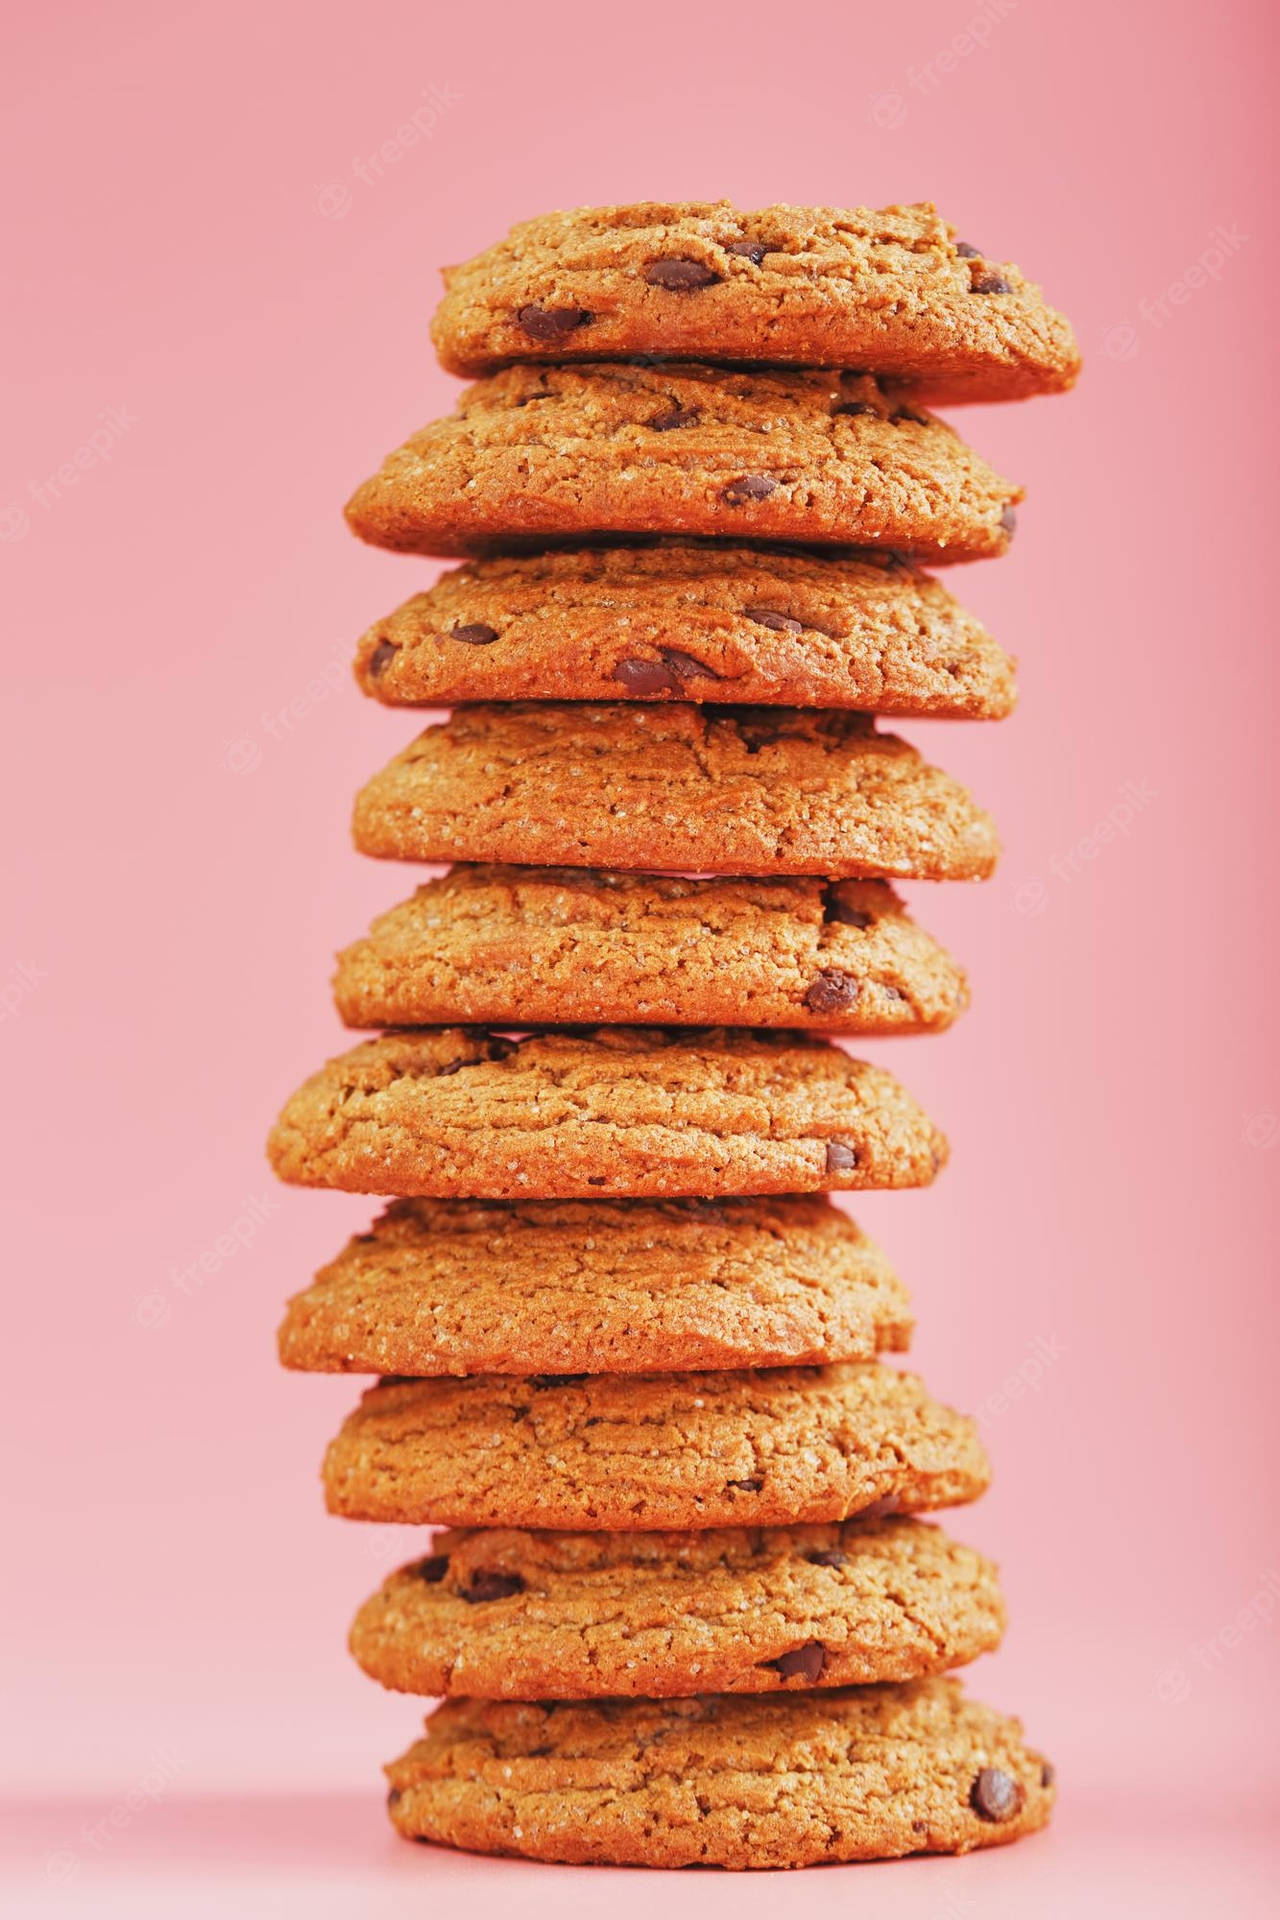 Oatmeal Cookie Iphone Wallpaper